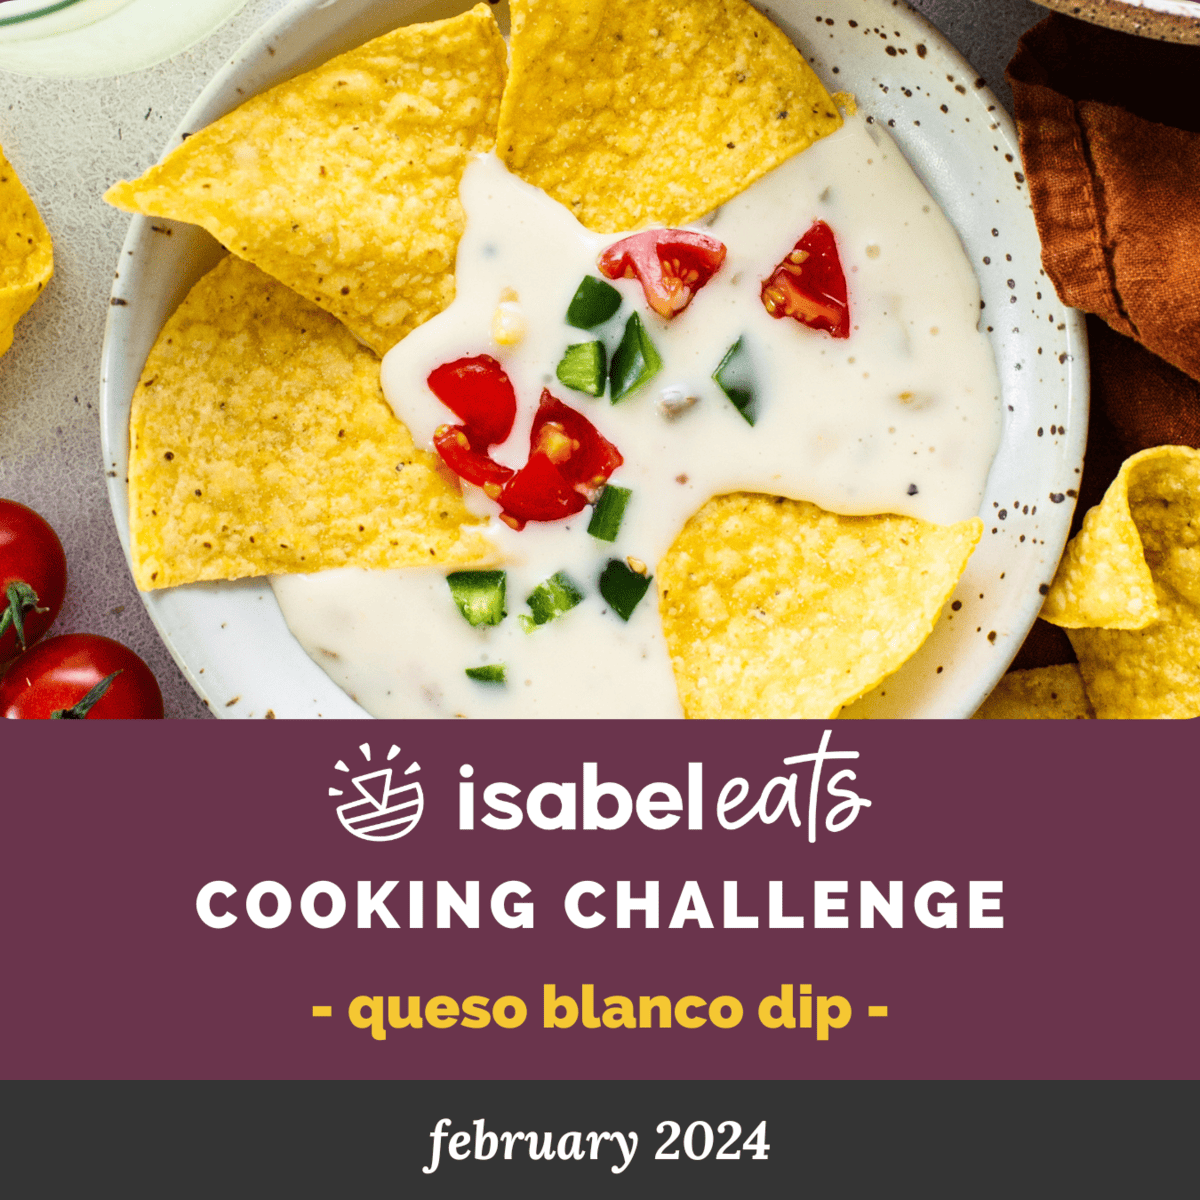 February 2024 Cooking Challenge